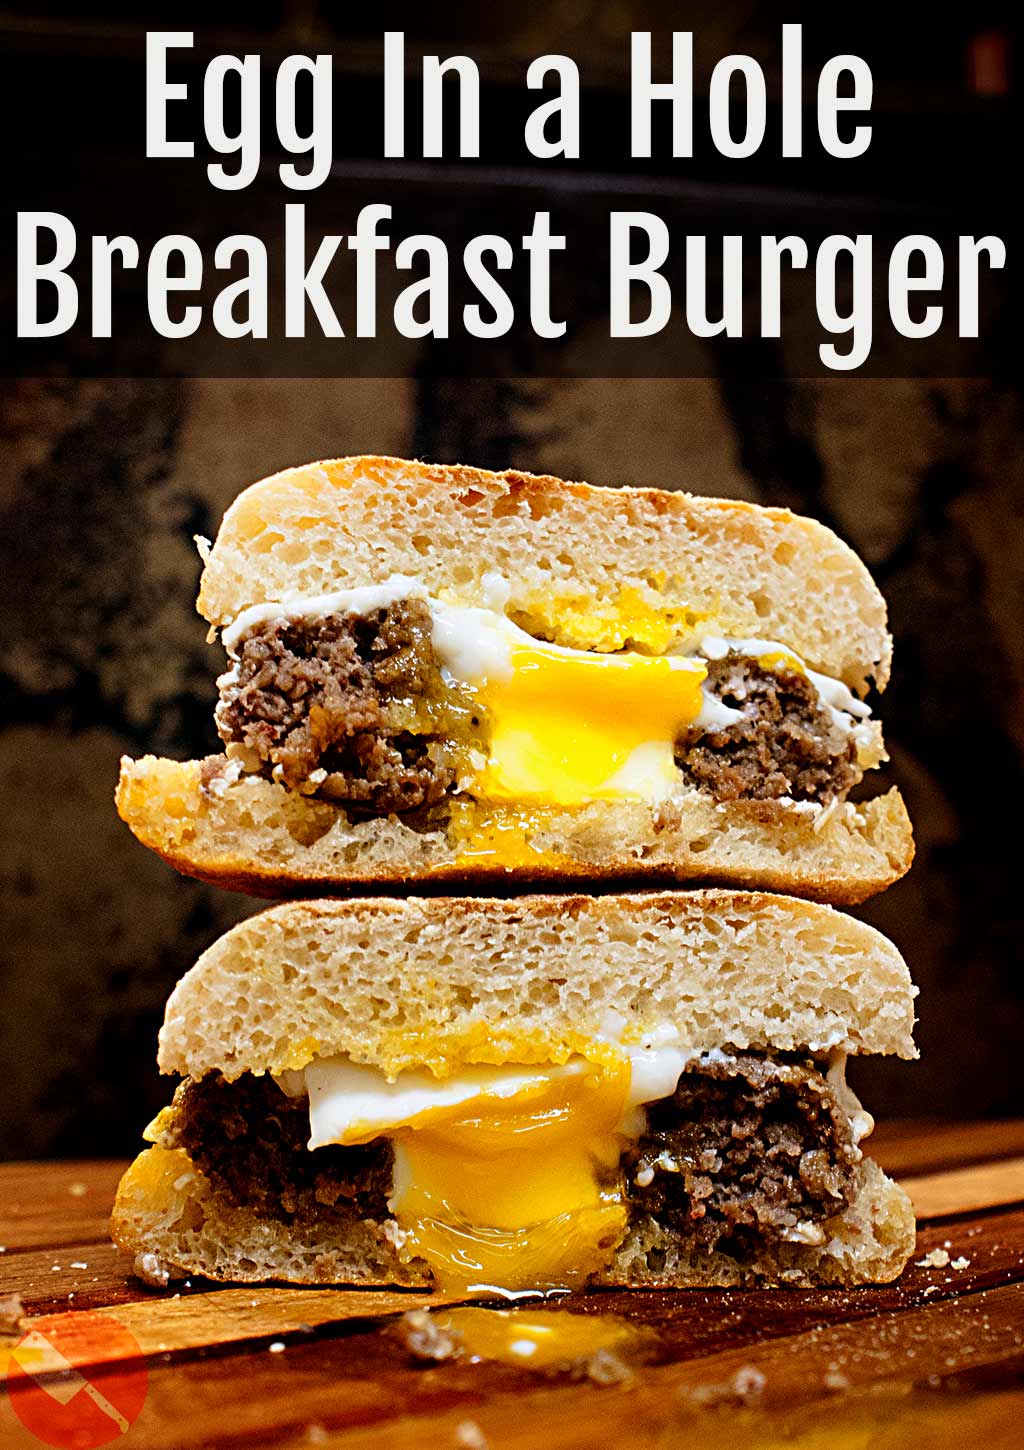 Egg-in-the-Hole Cast Iron Skillet Burgers